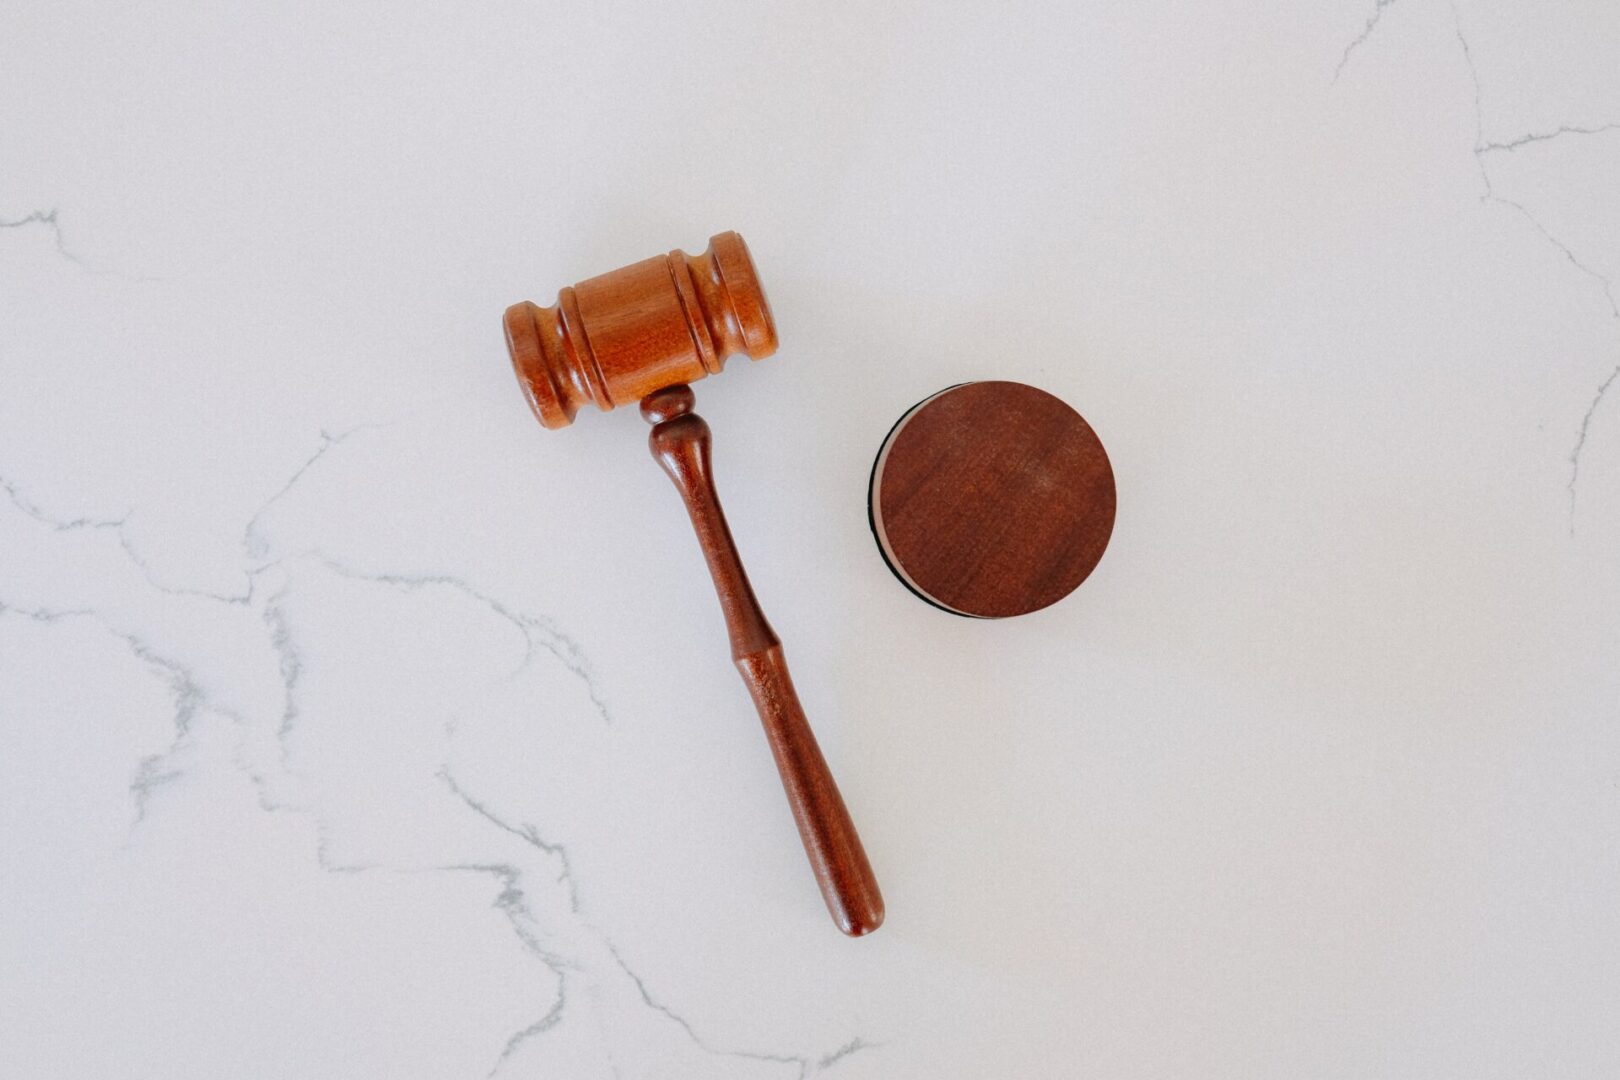 A wooden gavel and coin on top of white counter.